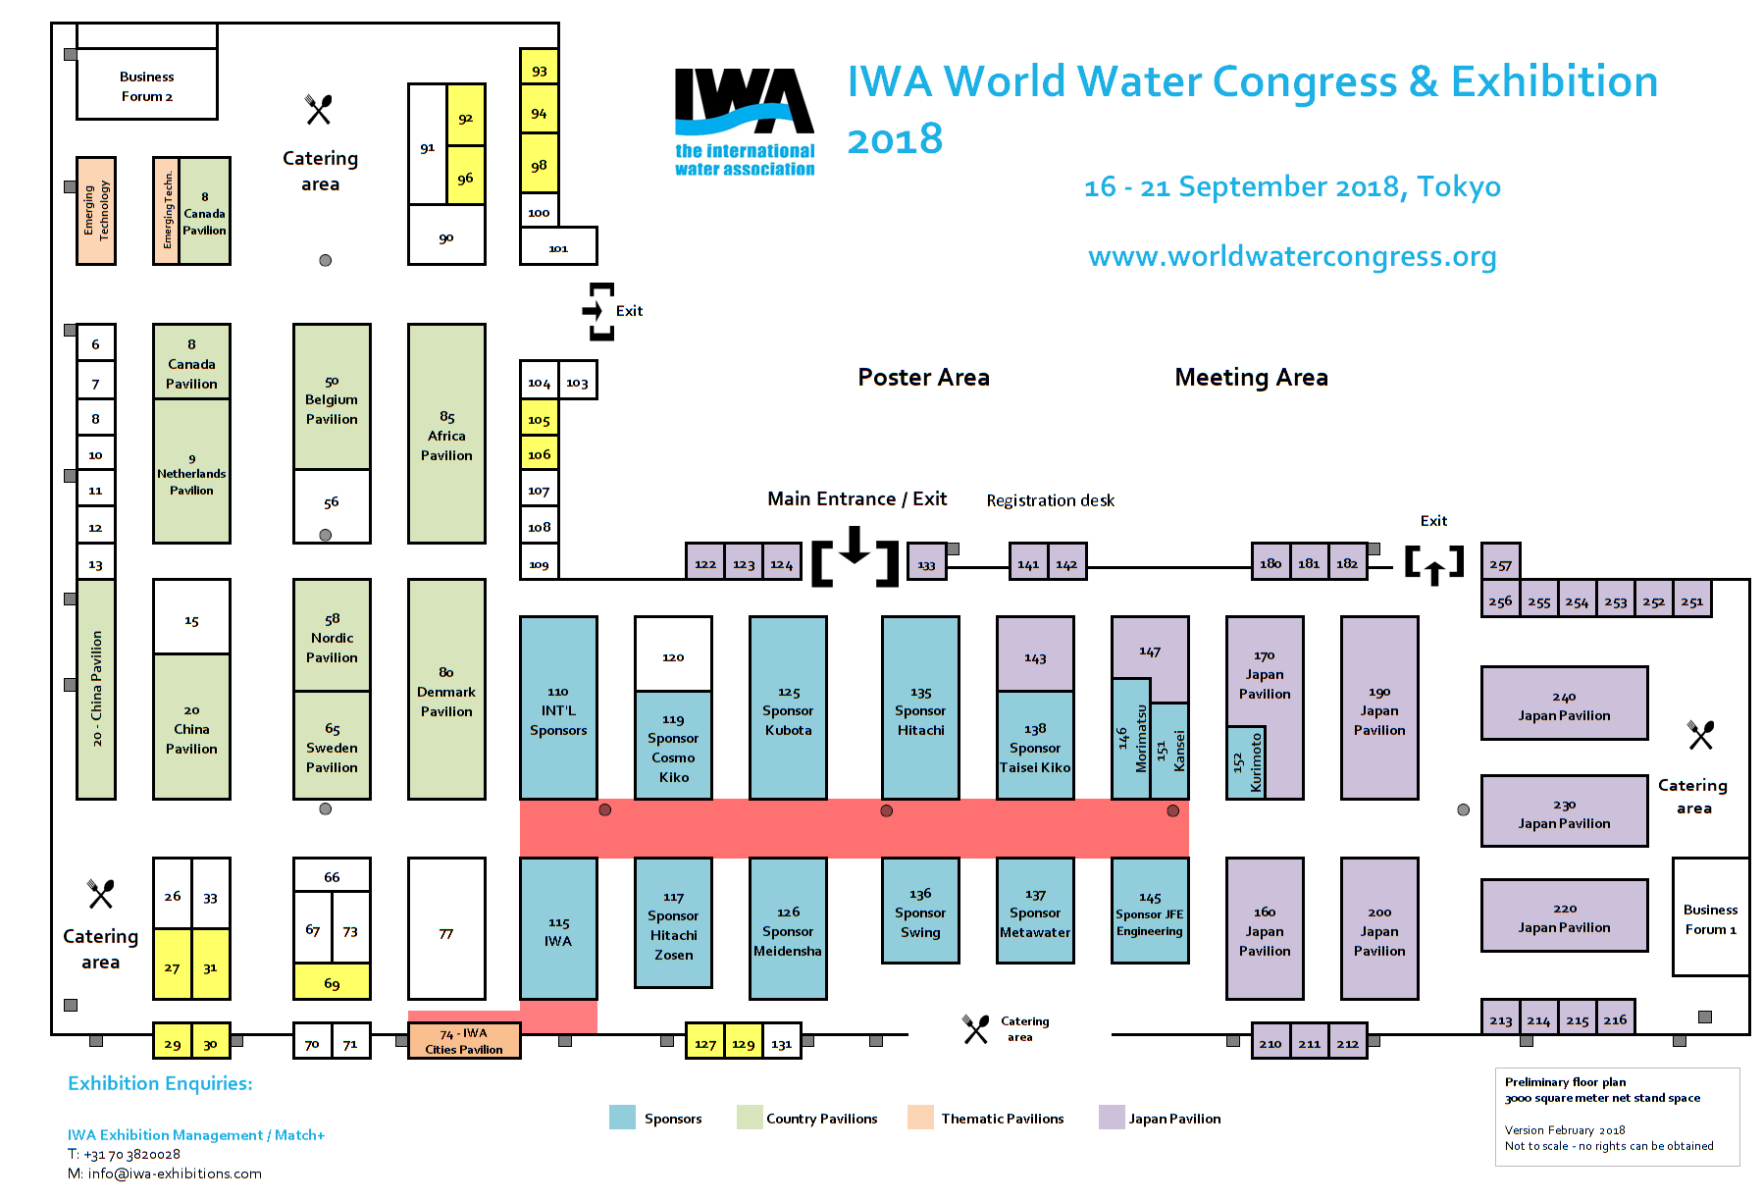 The IWA WWCE ’18 floor plan last available stand spaces